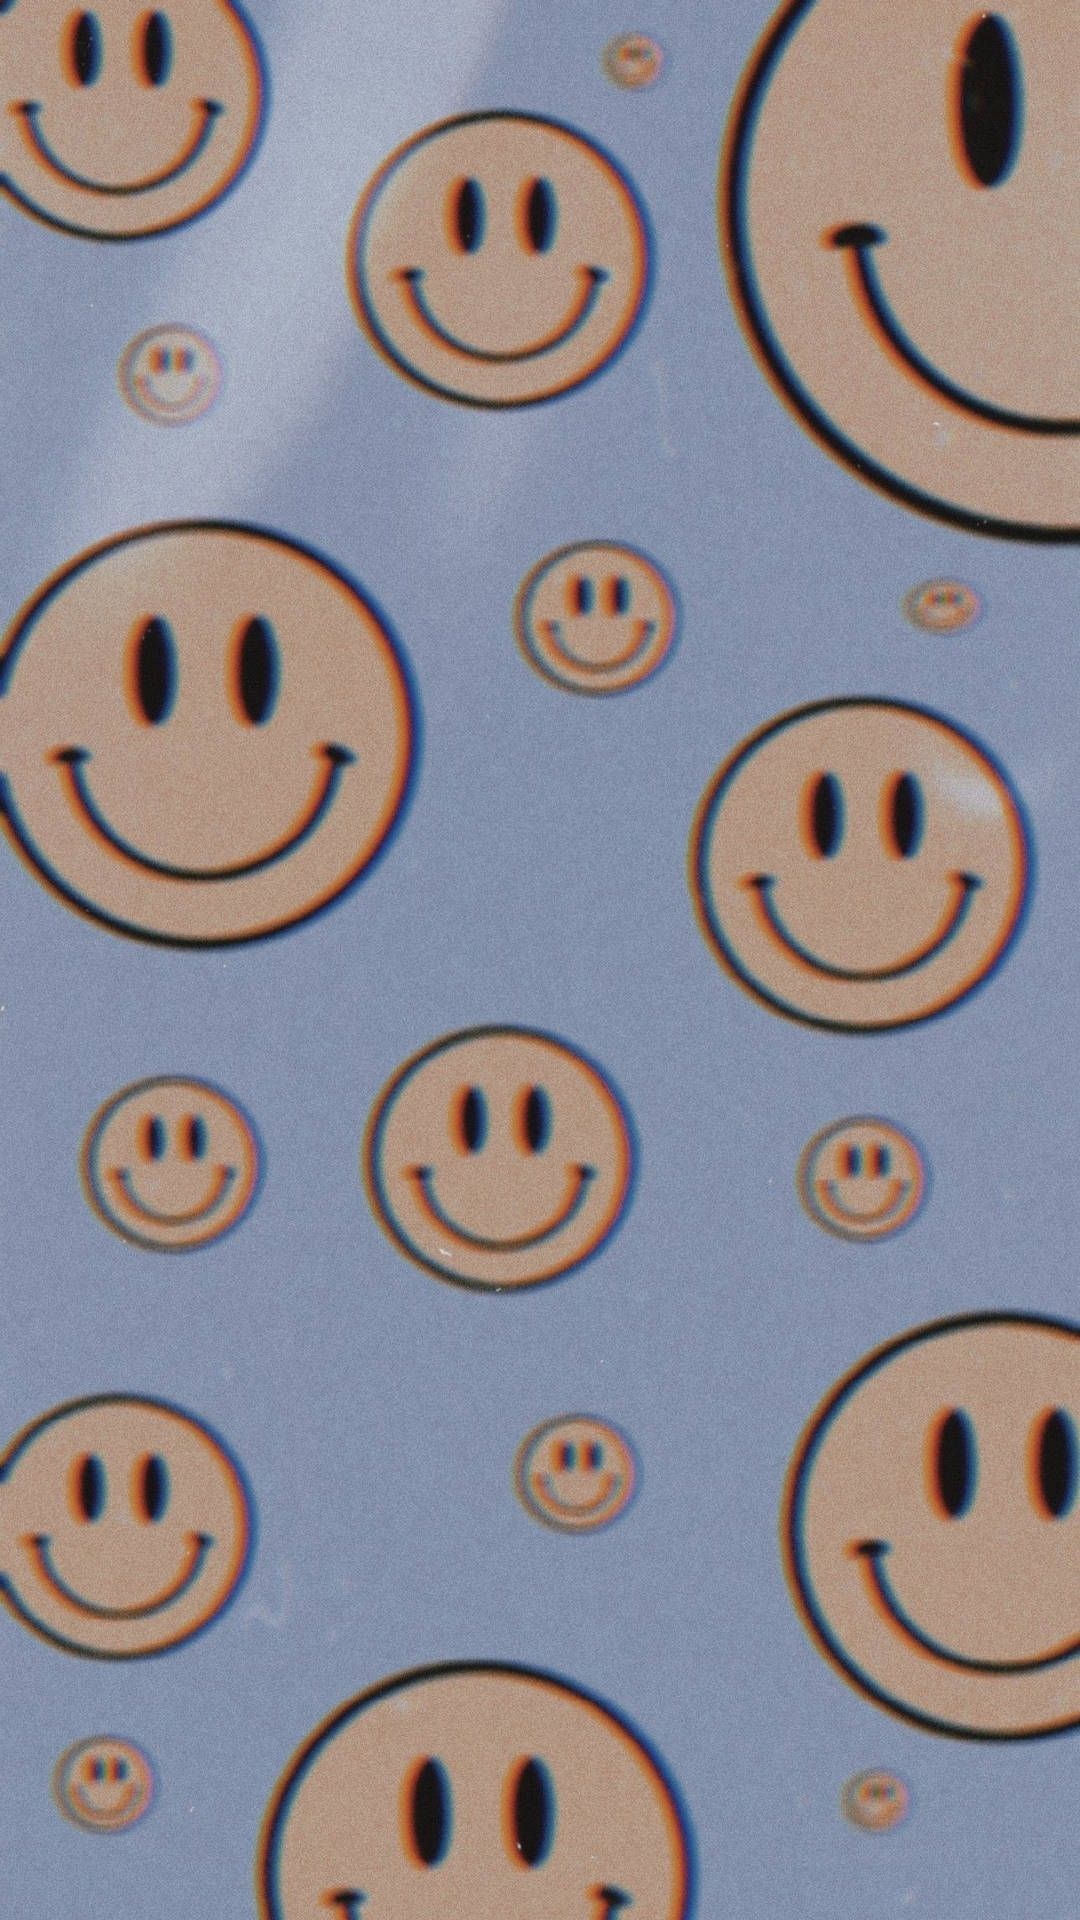 A picture of many smiley faces on the screen - Profile picture, smile, Smiley